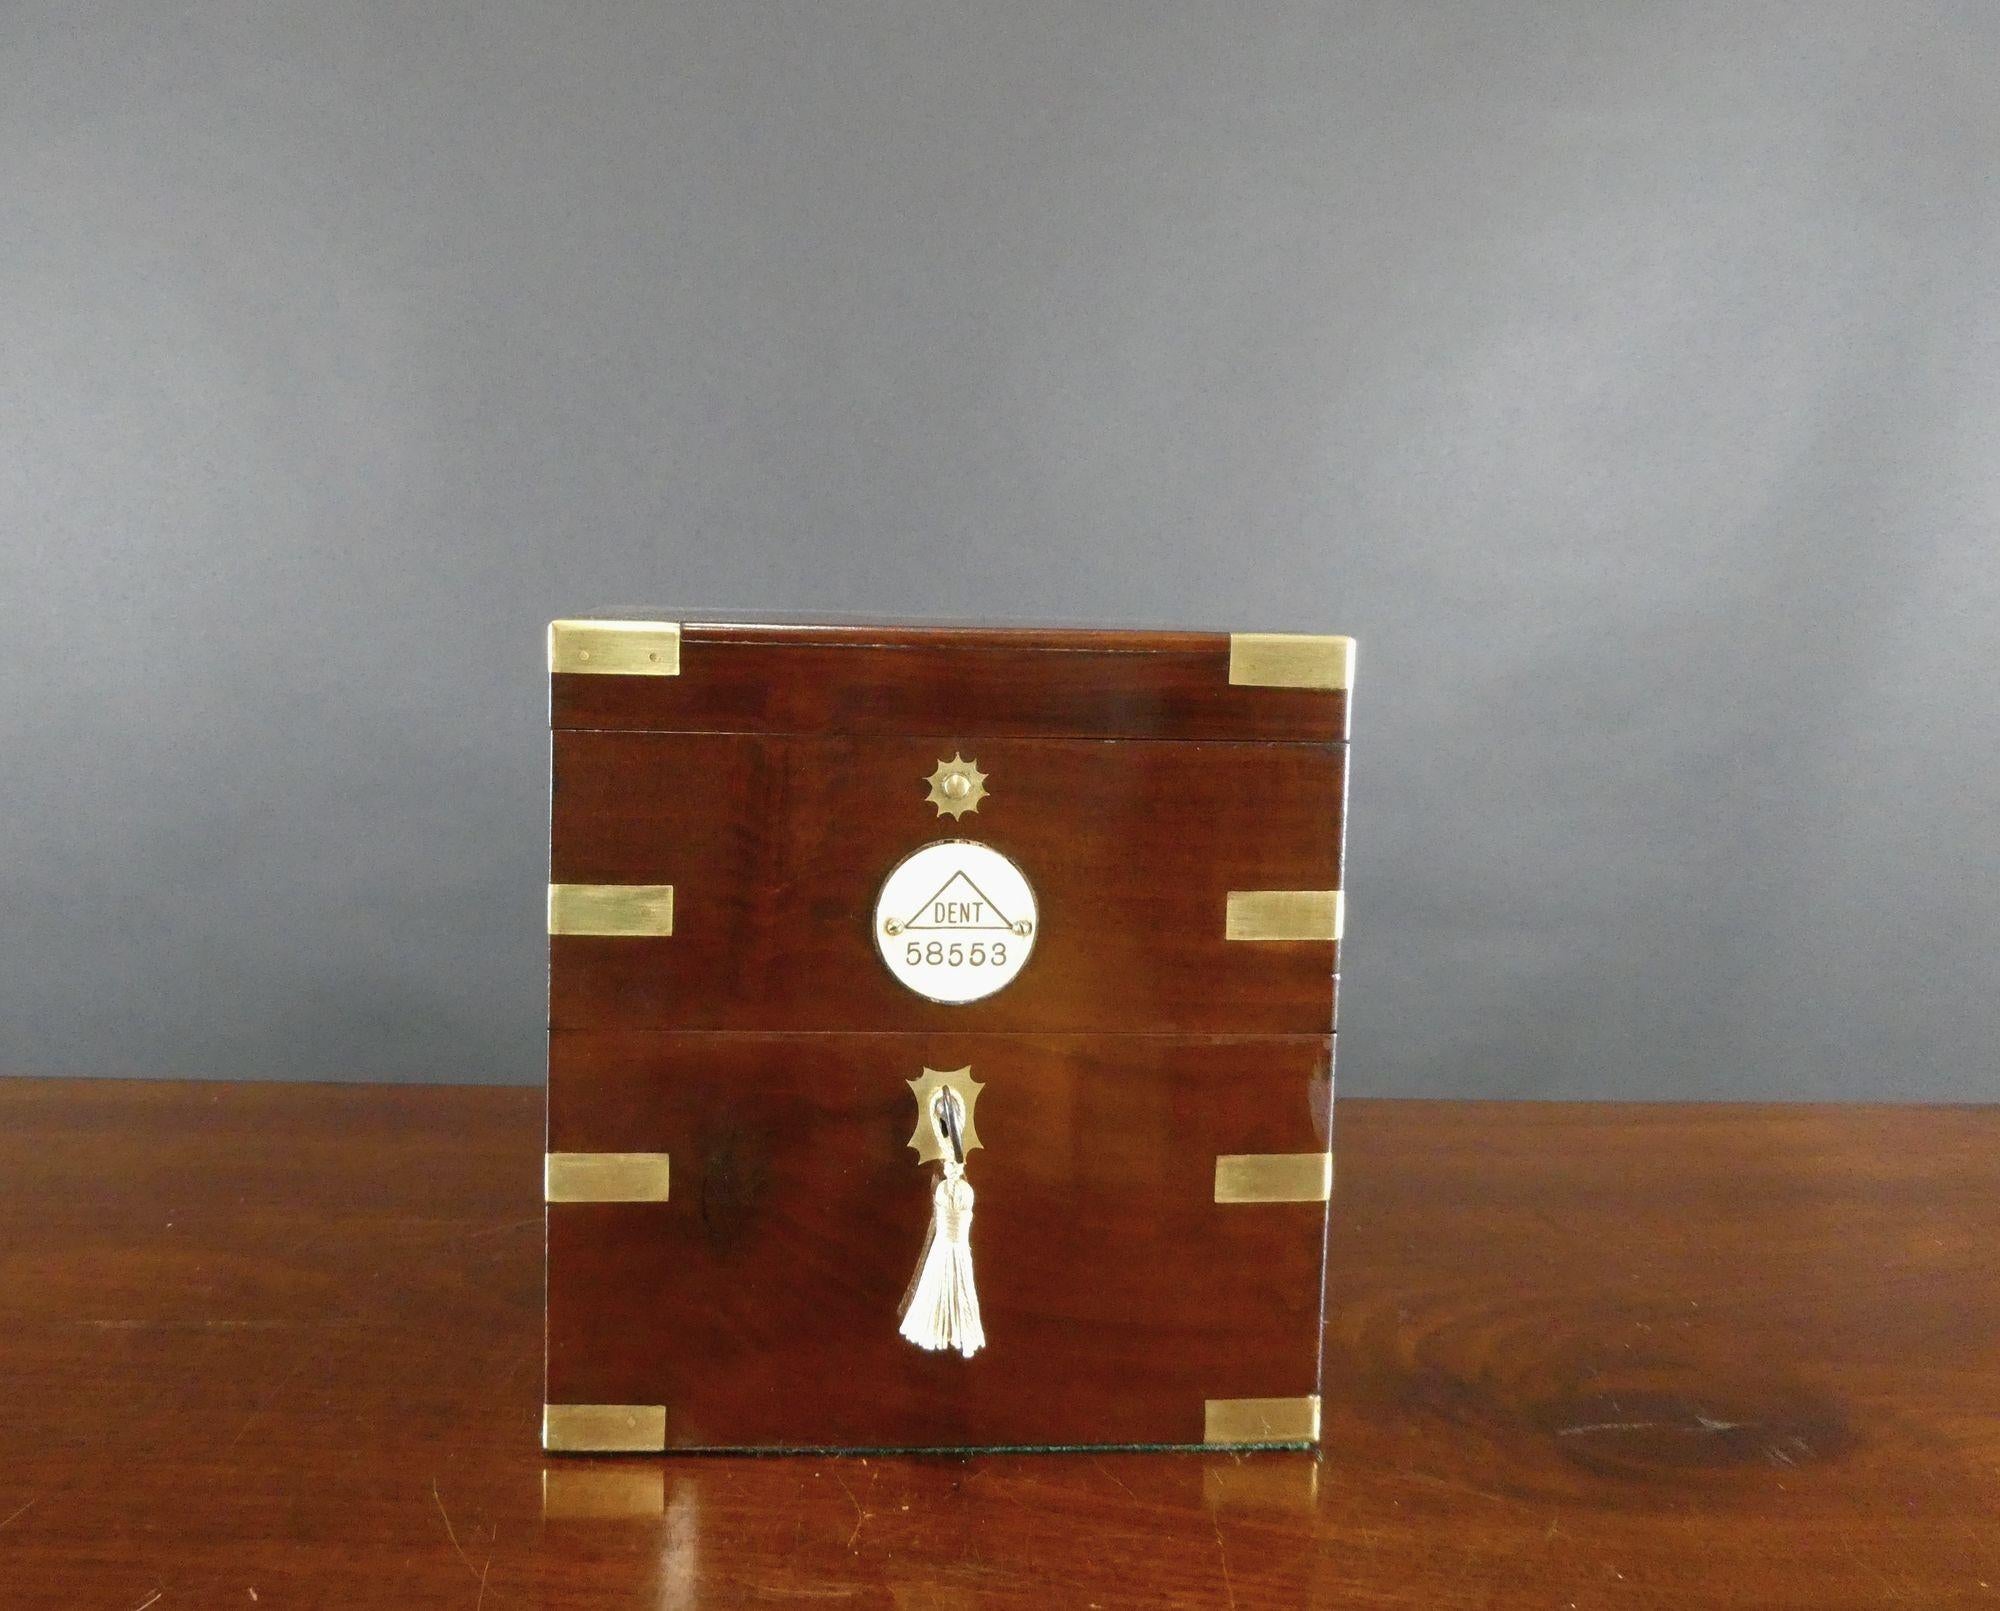 Fine Two Day Marine Chronometer by Dent, London. No58553 For Sale 6